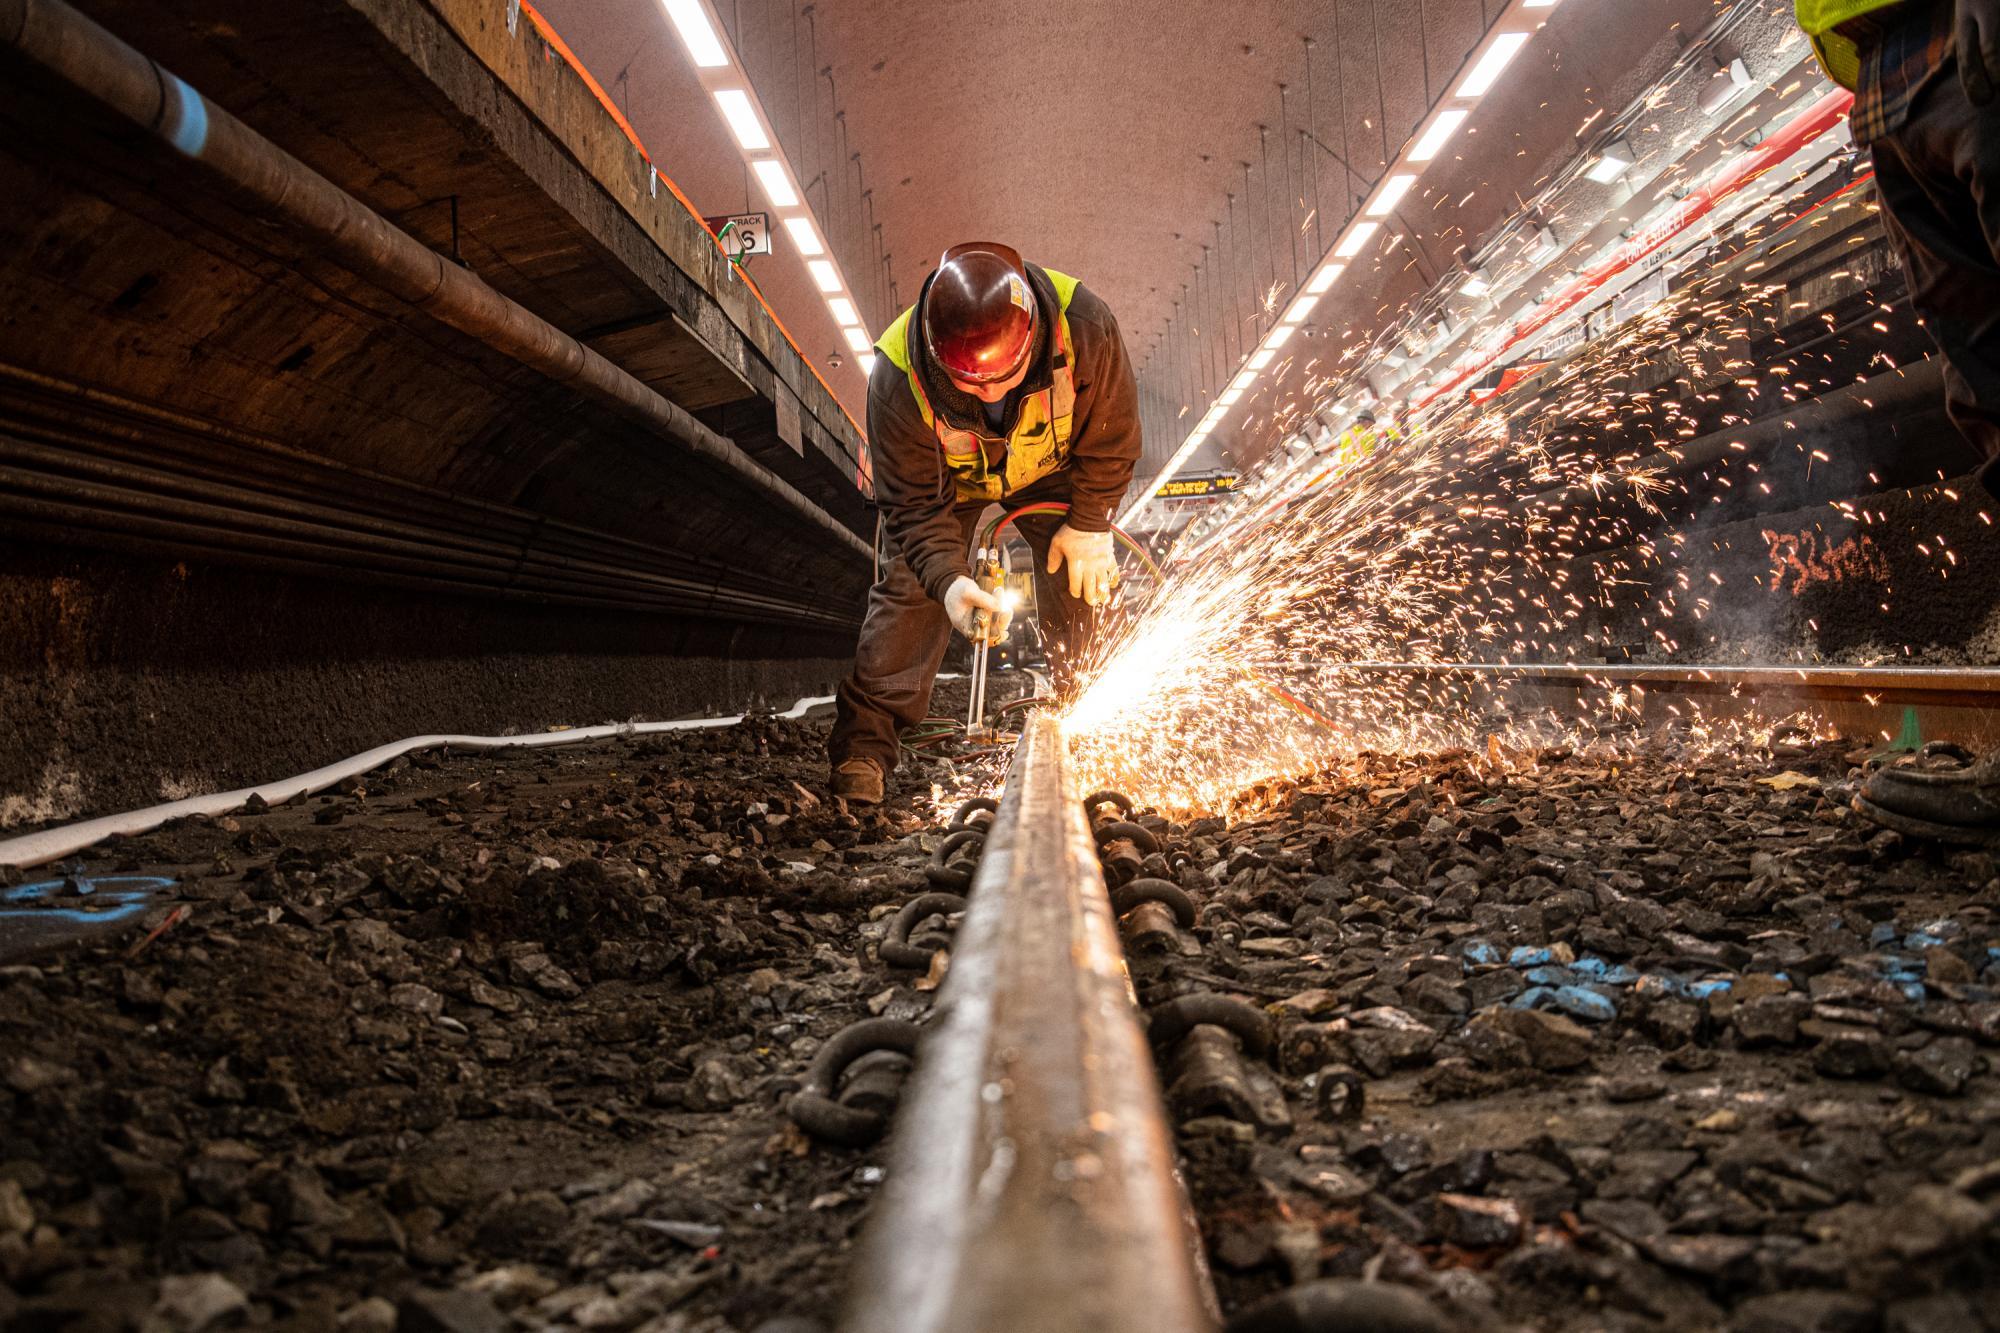 A crew member welds a section of track at Park Street as part of the December 6 – 8, 2019, Red Line weekend shutdown